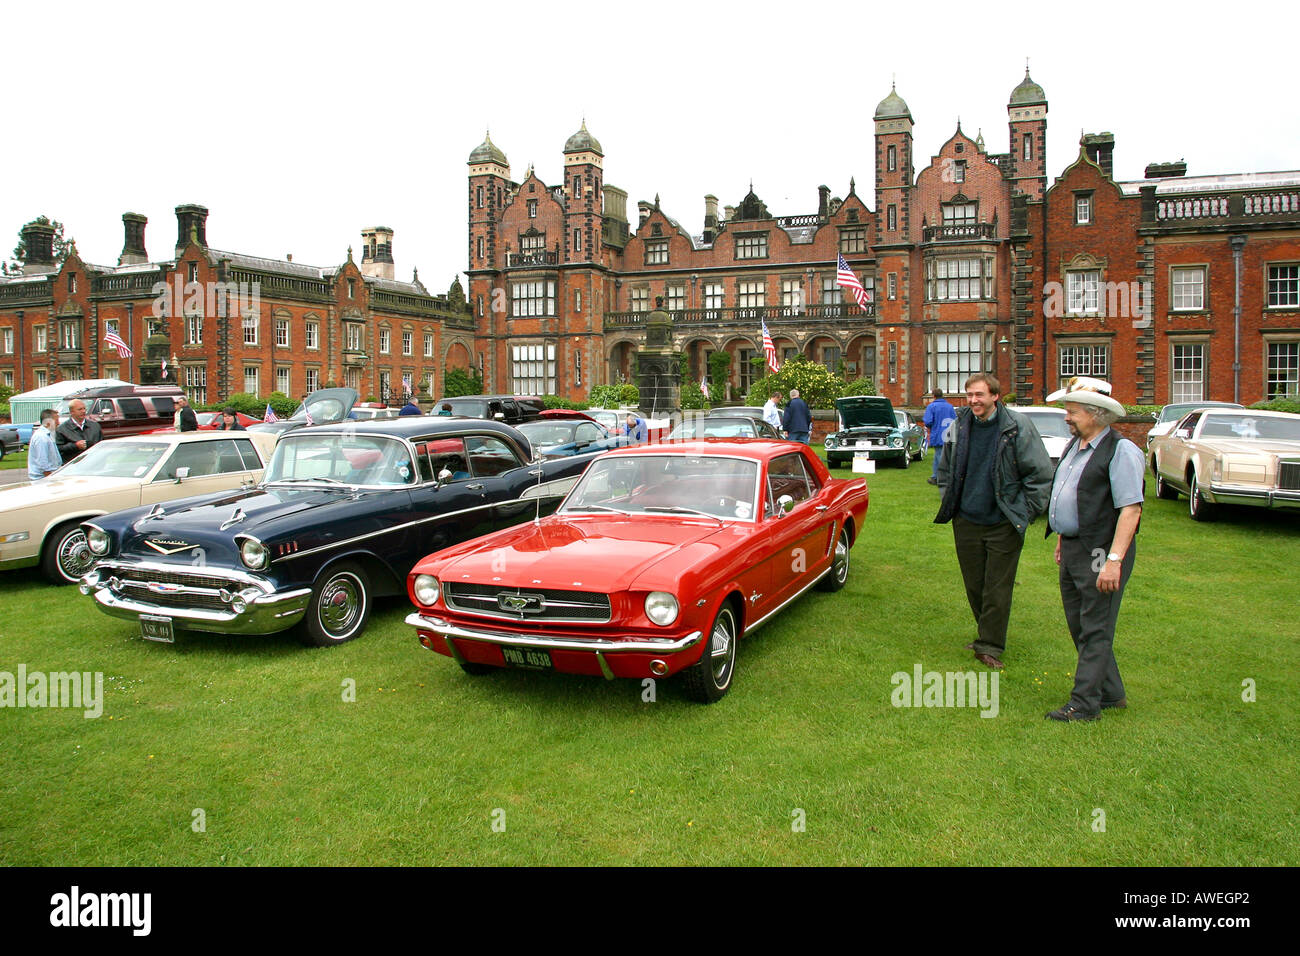 England Cheshire Macclesfield Capesthorne Hall Car Rally American vintage cars Stock Photo